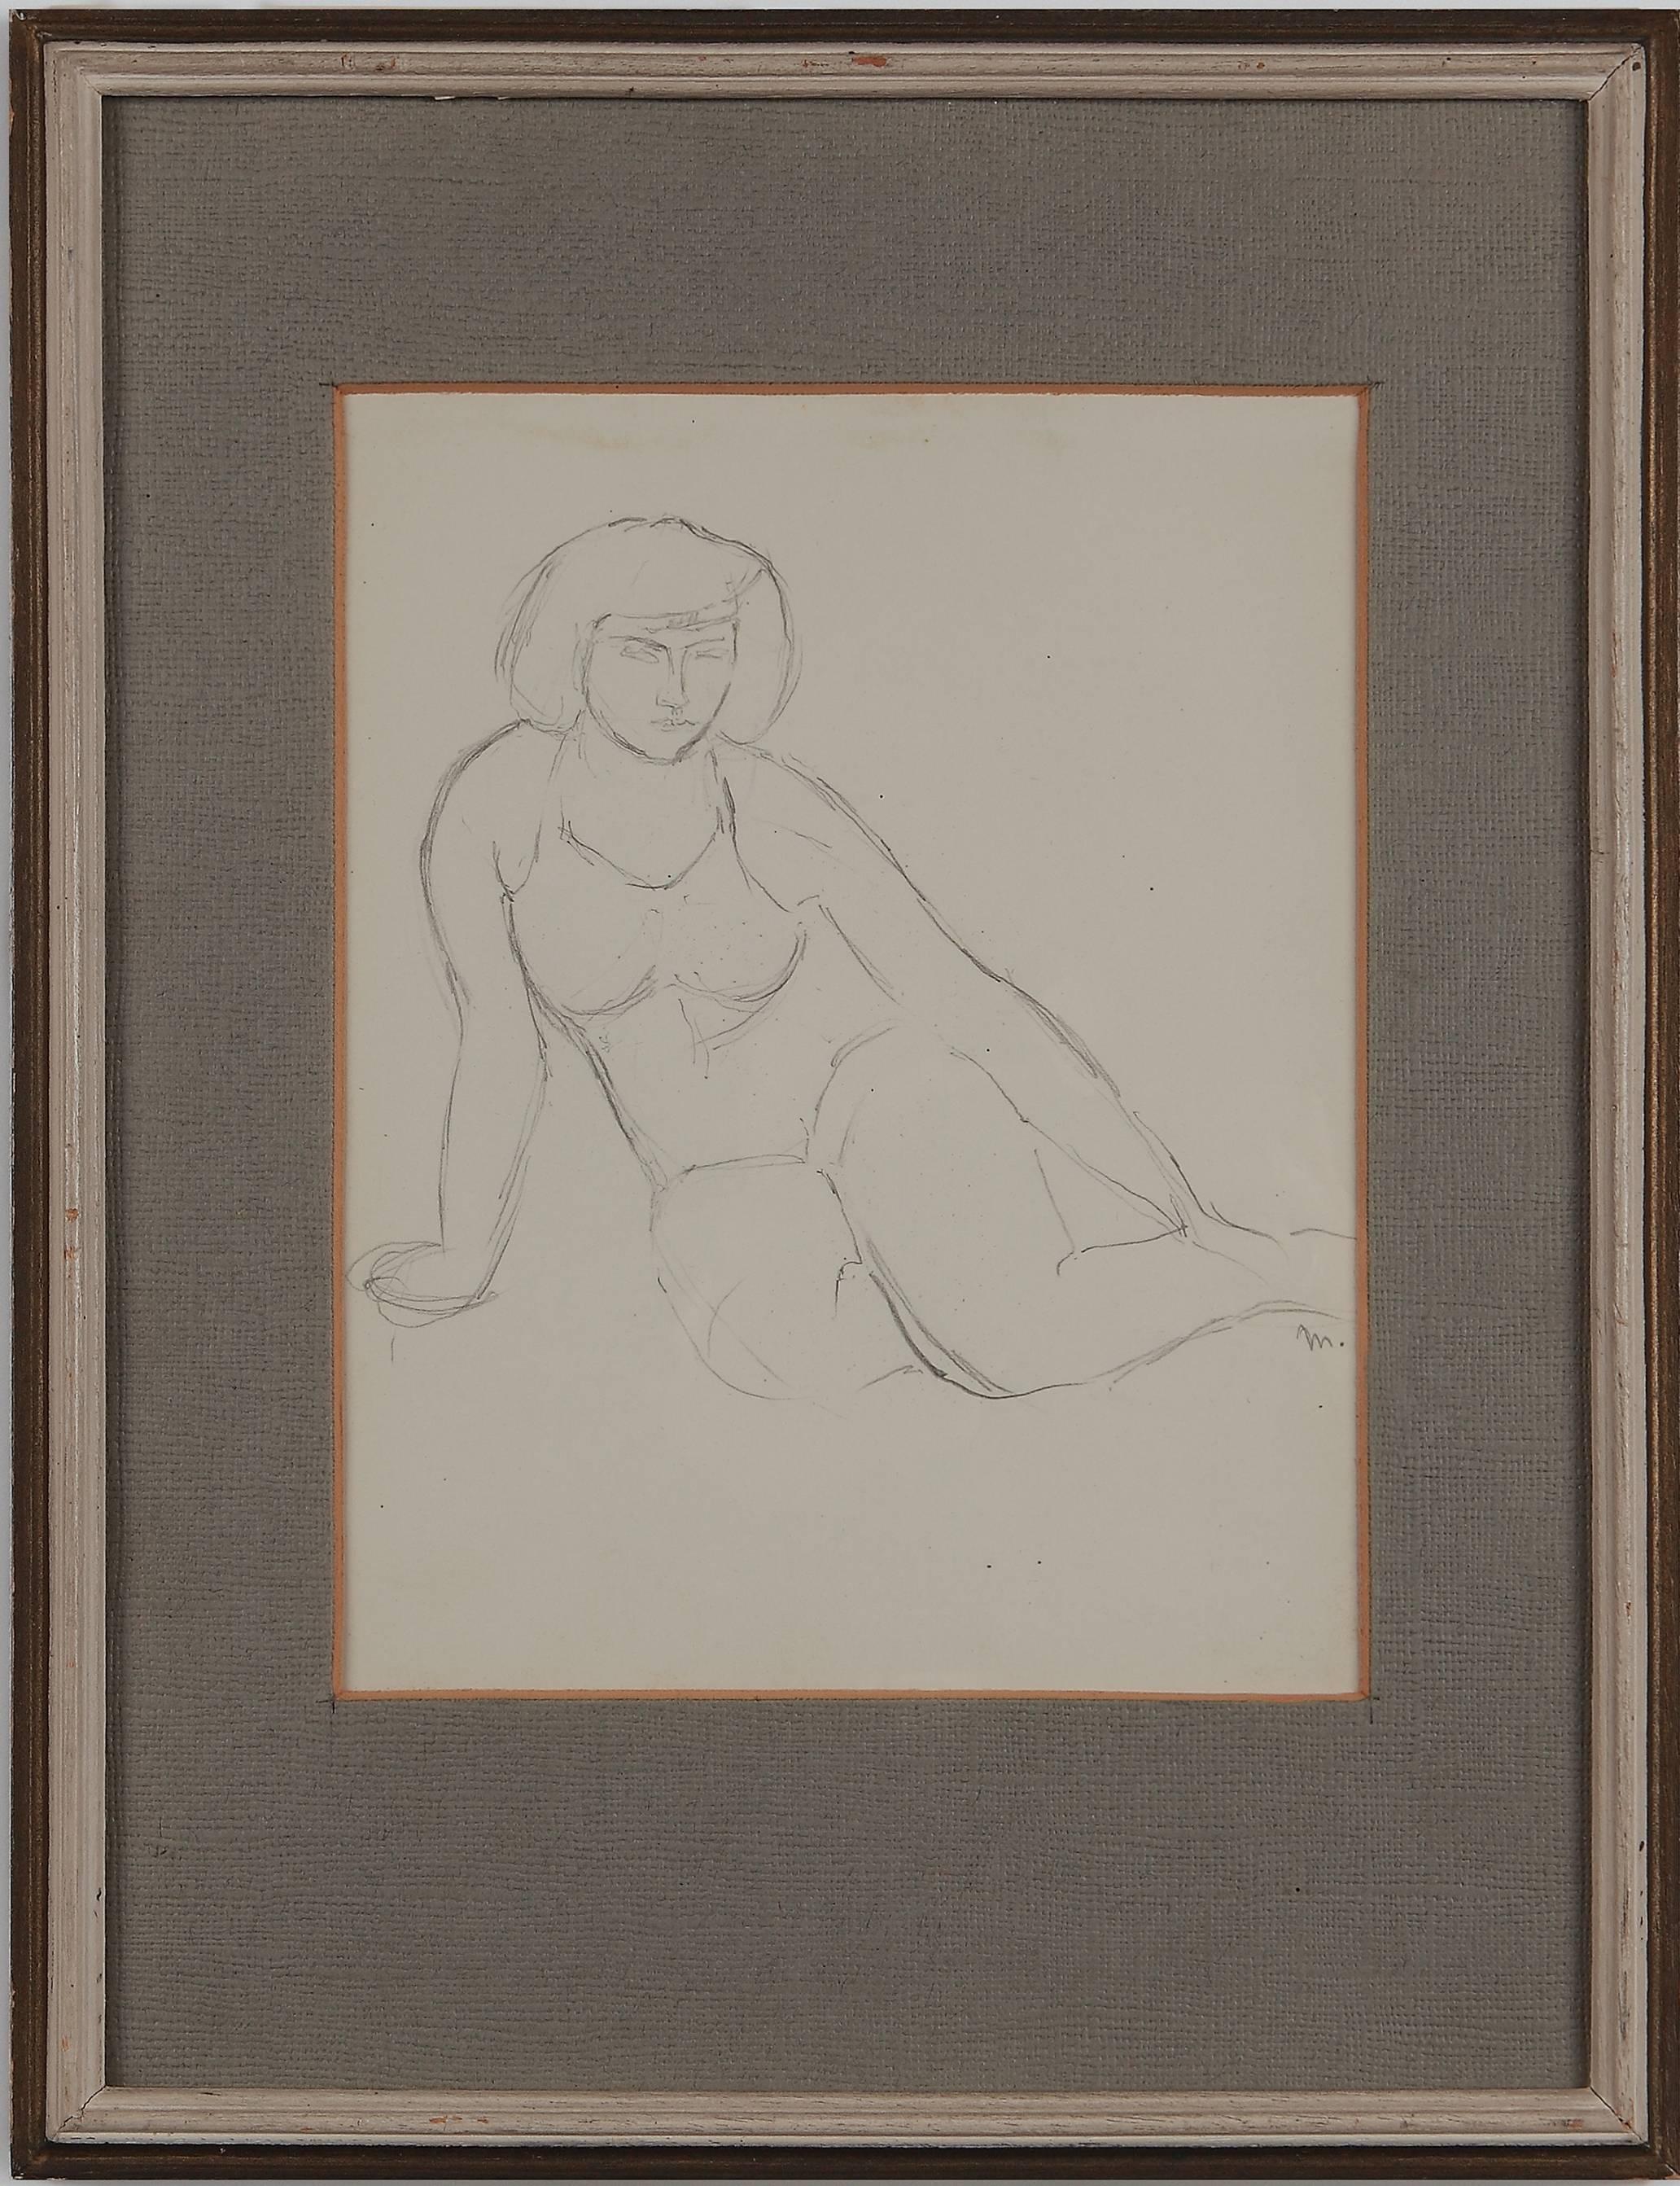 Pencil on paper, around 1920 by Adolphe Milich ( 1886-1964 ), French-Polish. Monogrammed lower right in pencil: m
Measurements: Sheet: 8.86 x 8.27 in ( 22,5 x 21 cm ) Framed: 13.86 x 10.75 in ( 35,2 x 27,3 cm )

